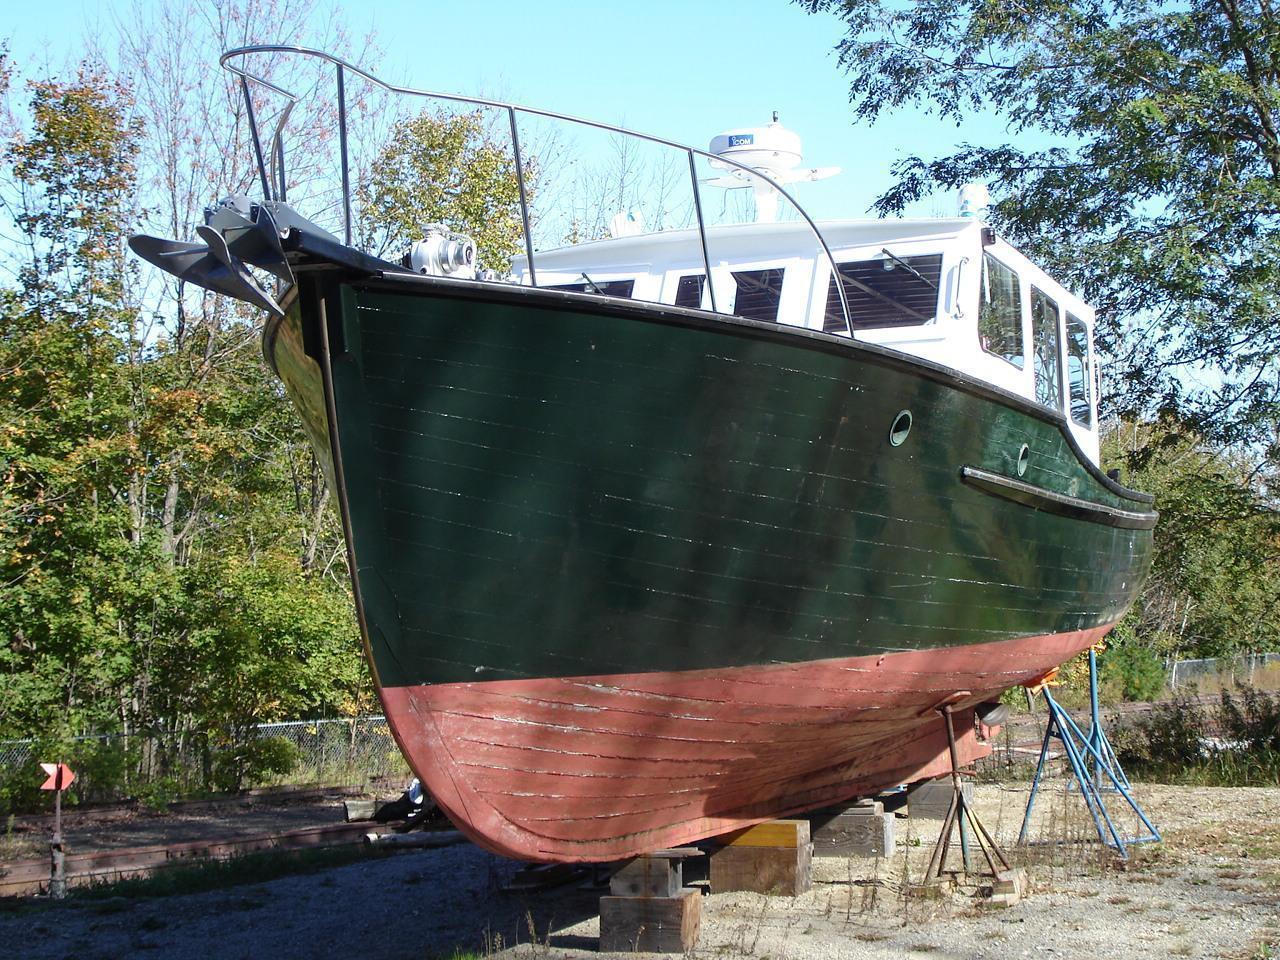 Lash Brothers Classic Maine Cruiser - Downeast Flush Deck Lobster Boat, Spruce Head, Maine